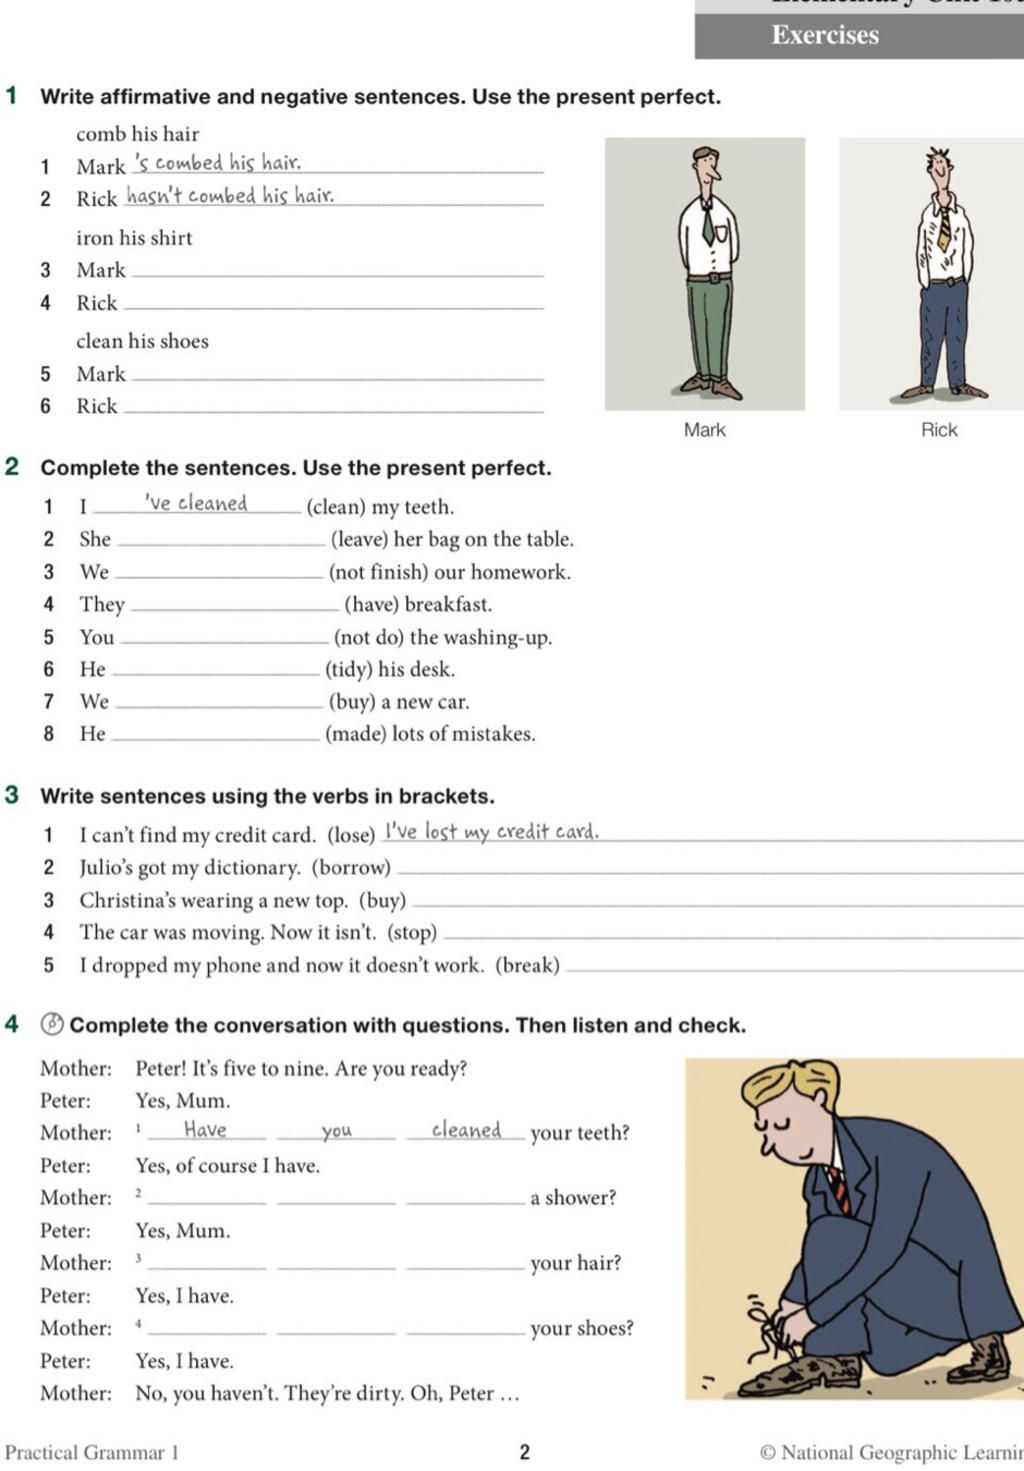 Exercises 1 Write affirmative and negative sentences. Use the present  perfect. comb his hair Mark 's combed his hair. Rick hasn't combed his hair.  1 2 iron